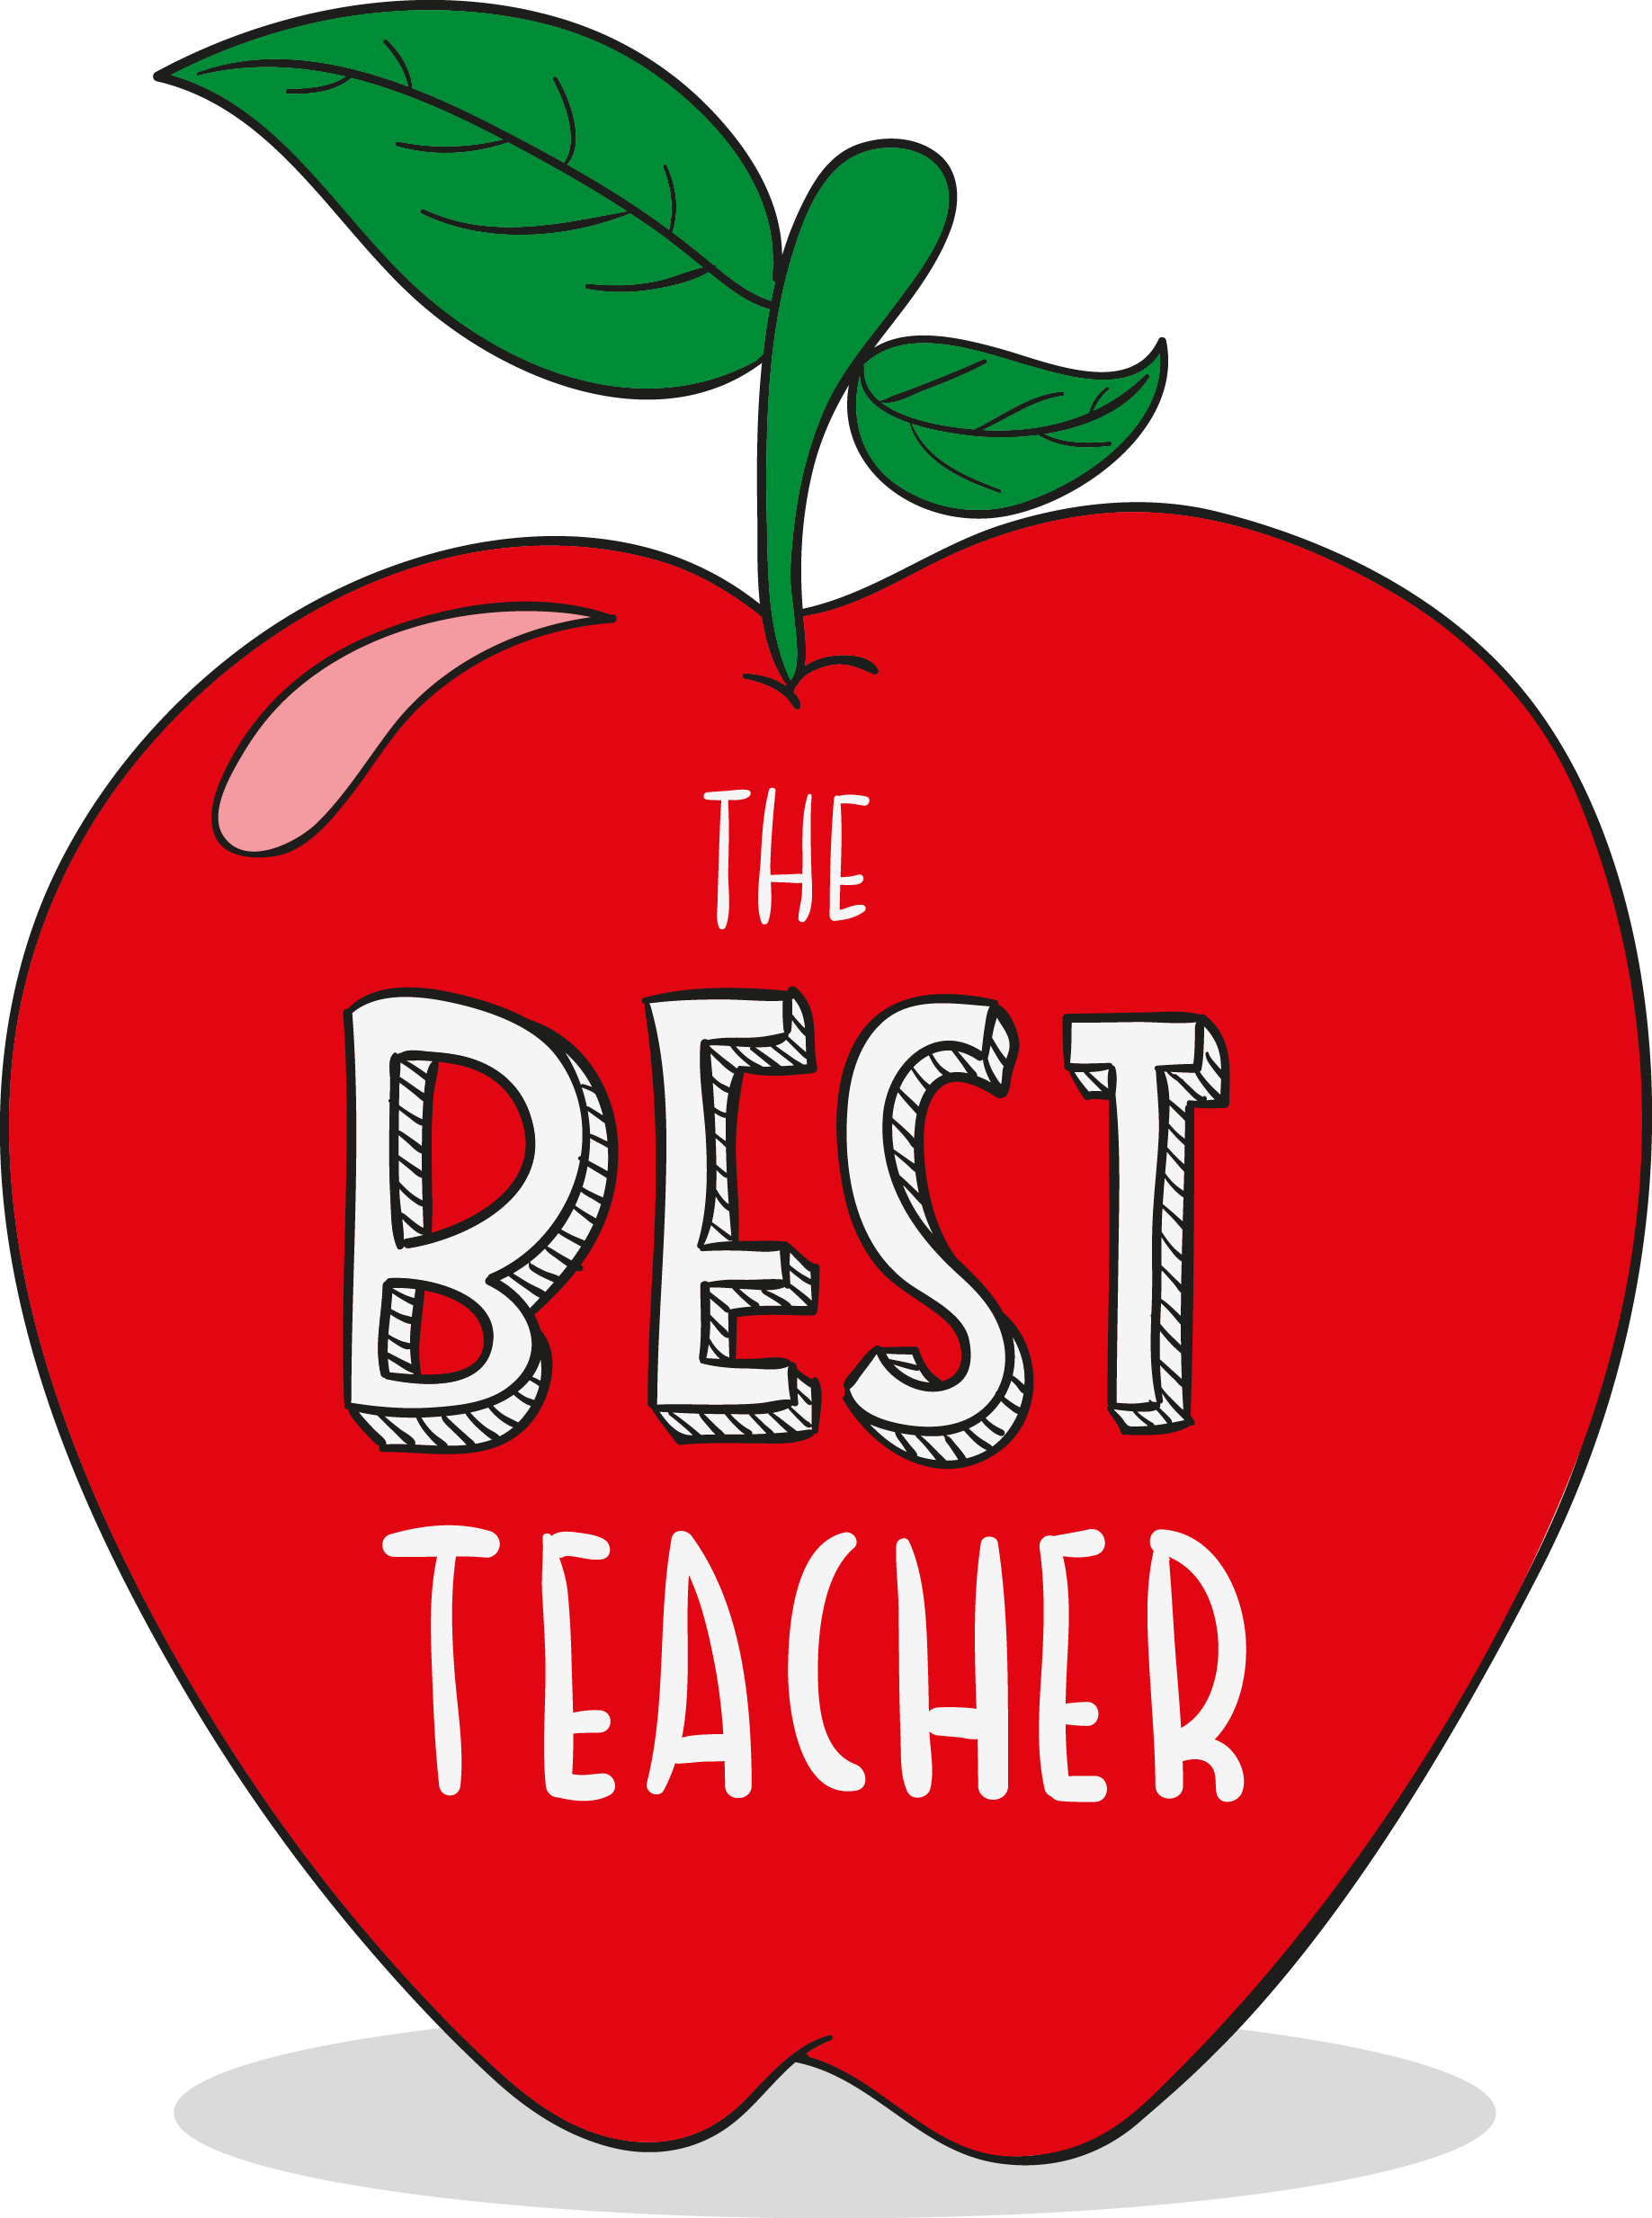 World Teacher's Day PNG High Quality Image